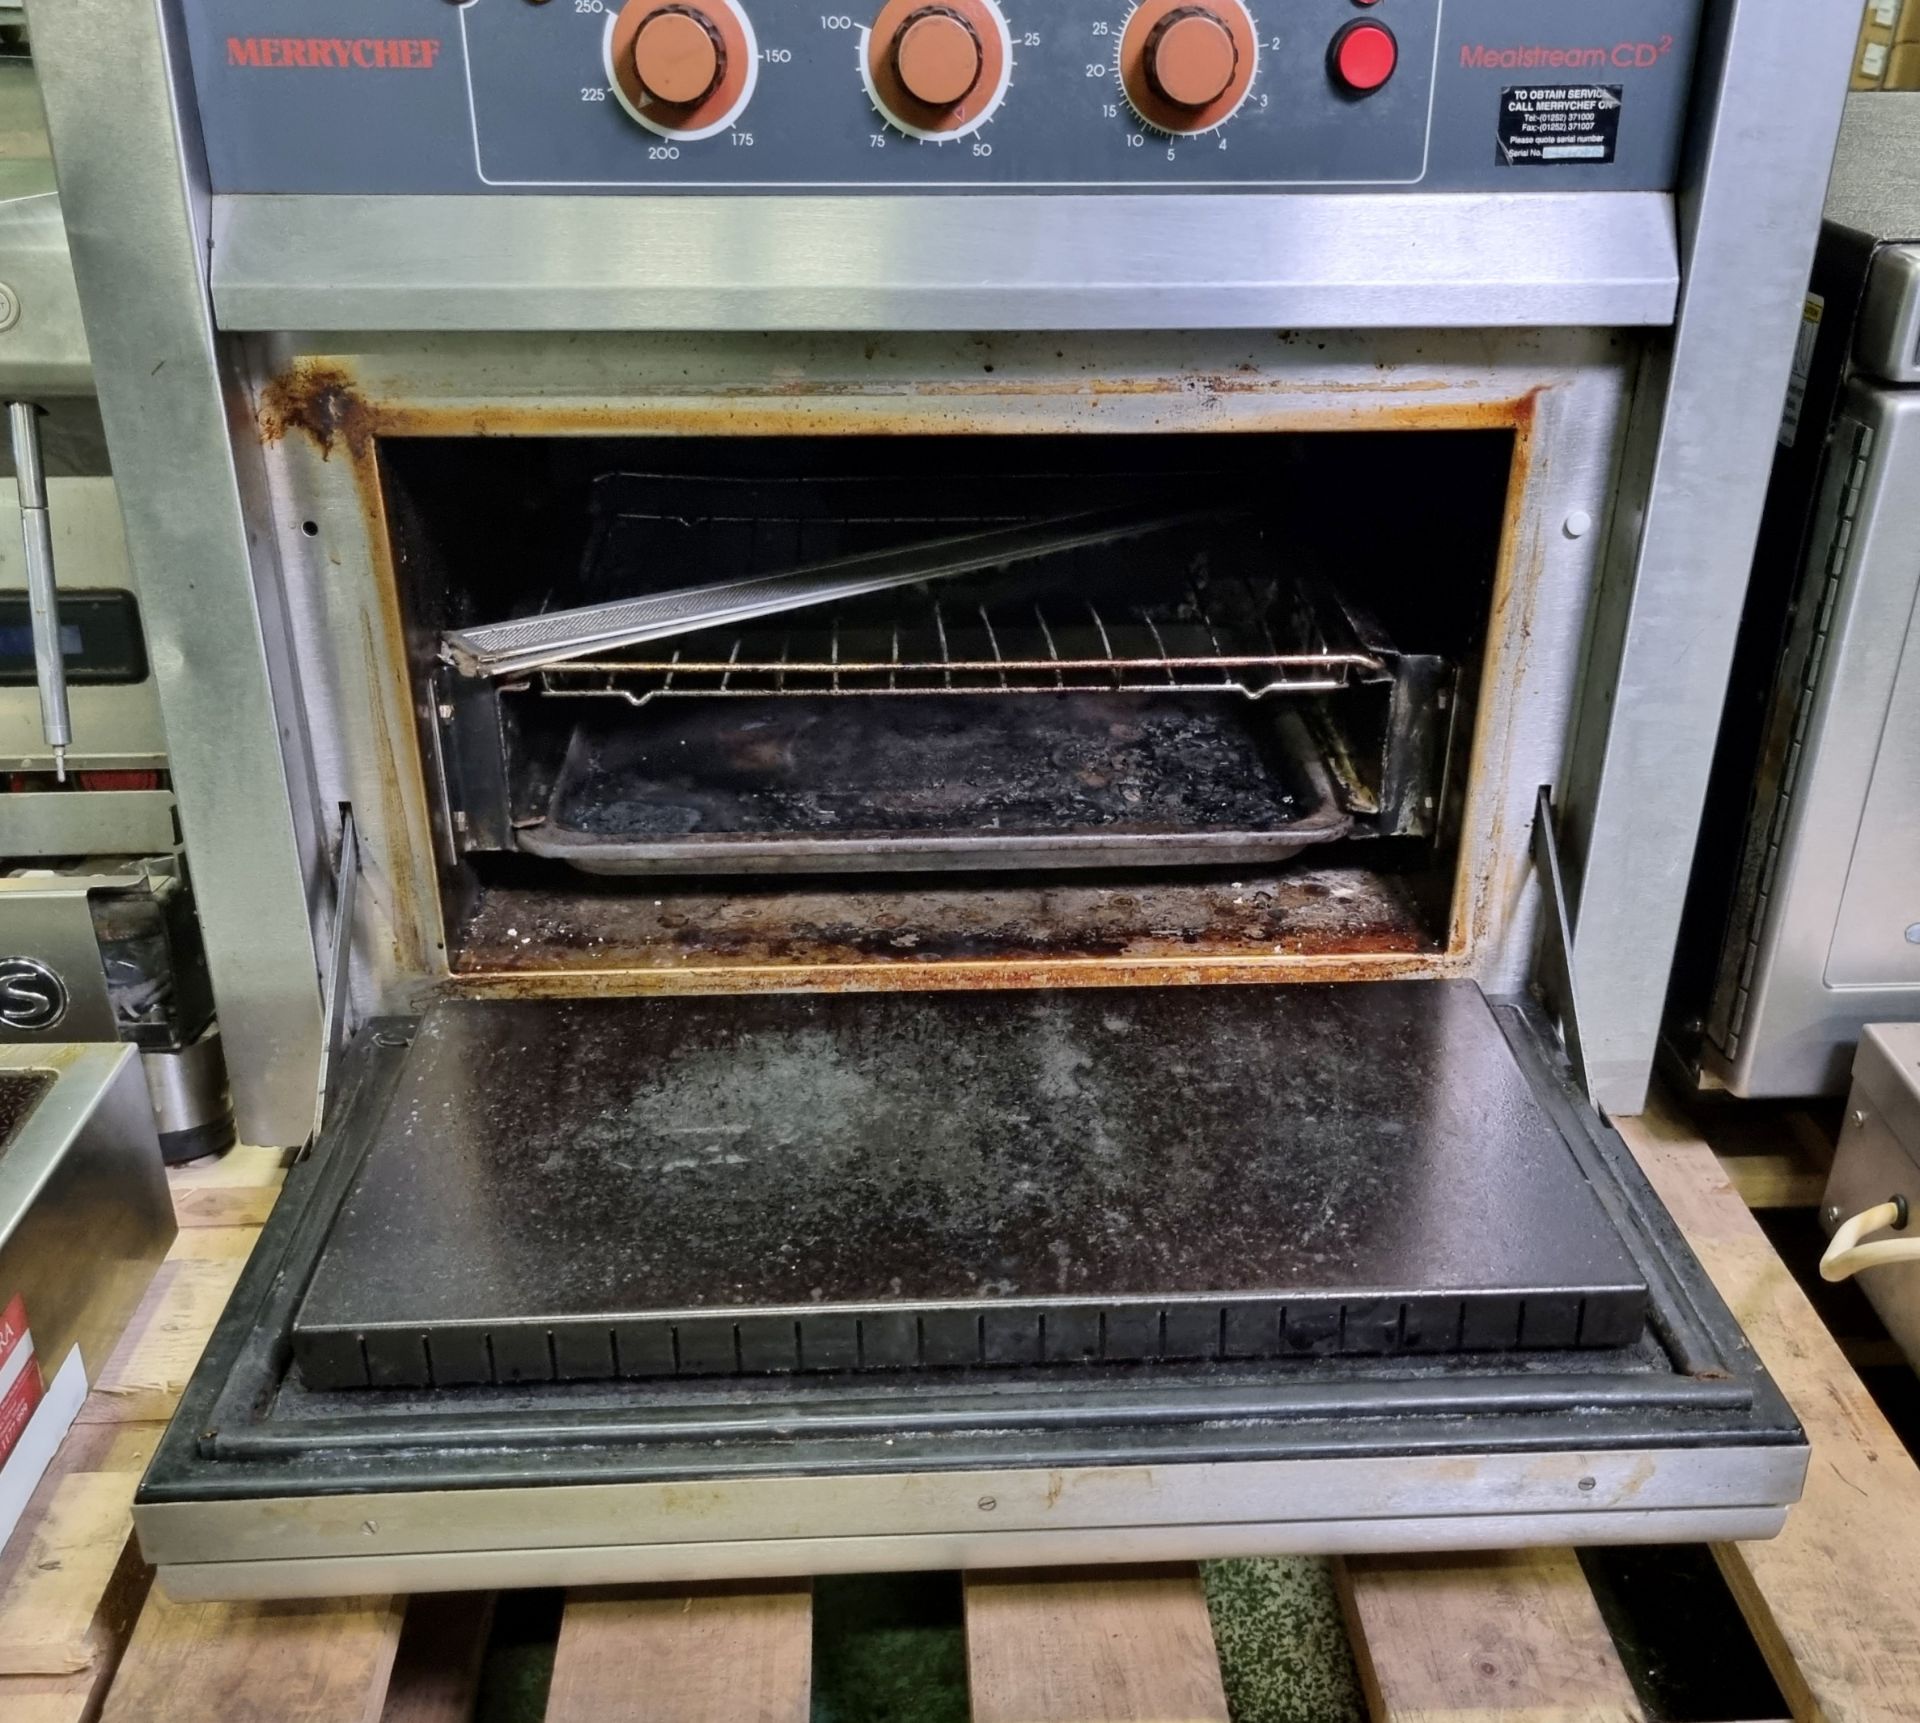 Merrychef MIS GD 2 electric oven - 60 x 71 x 65cm - Image 3 of 6